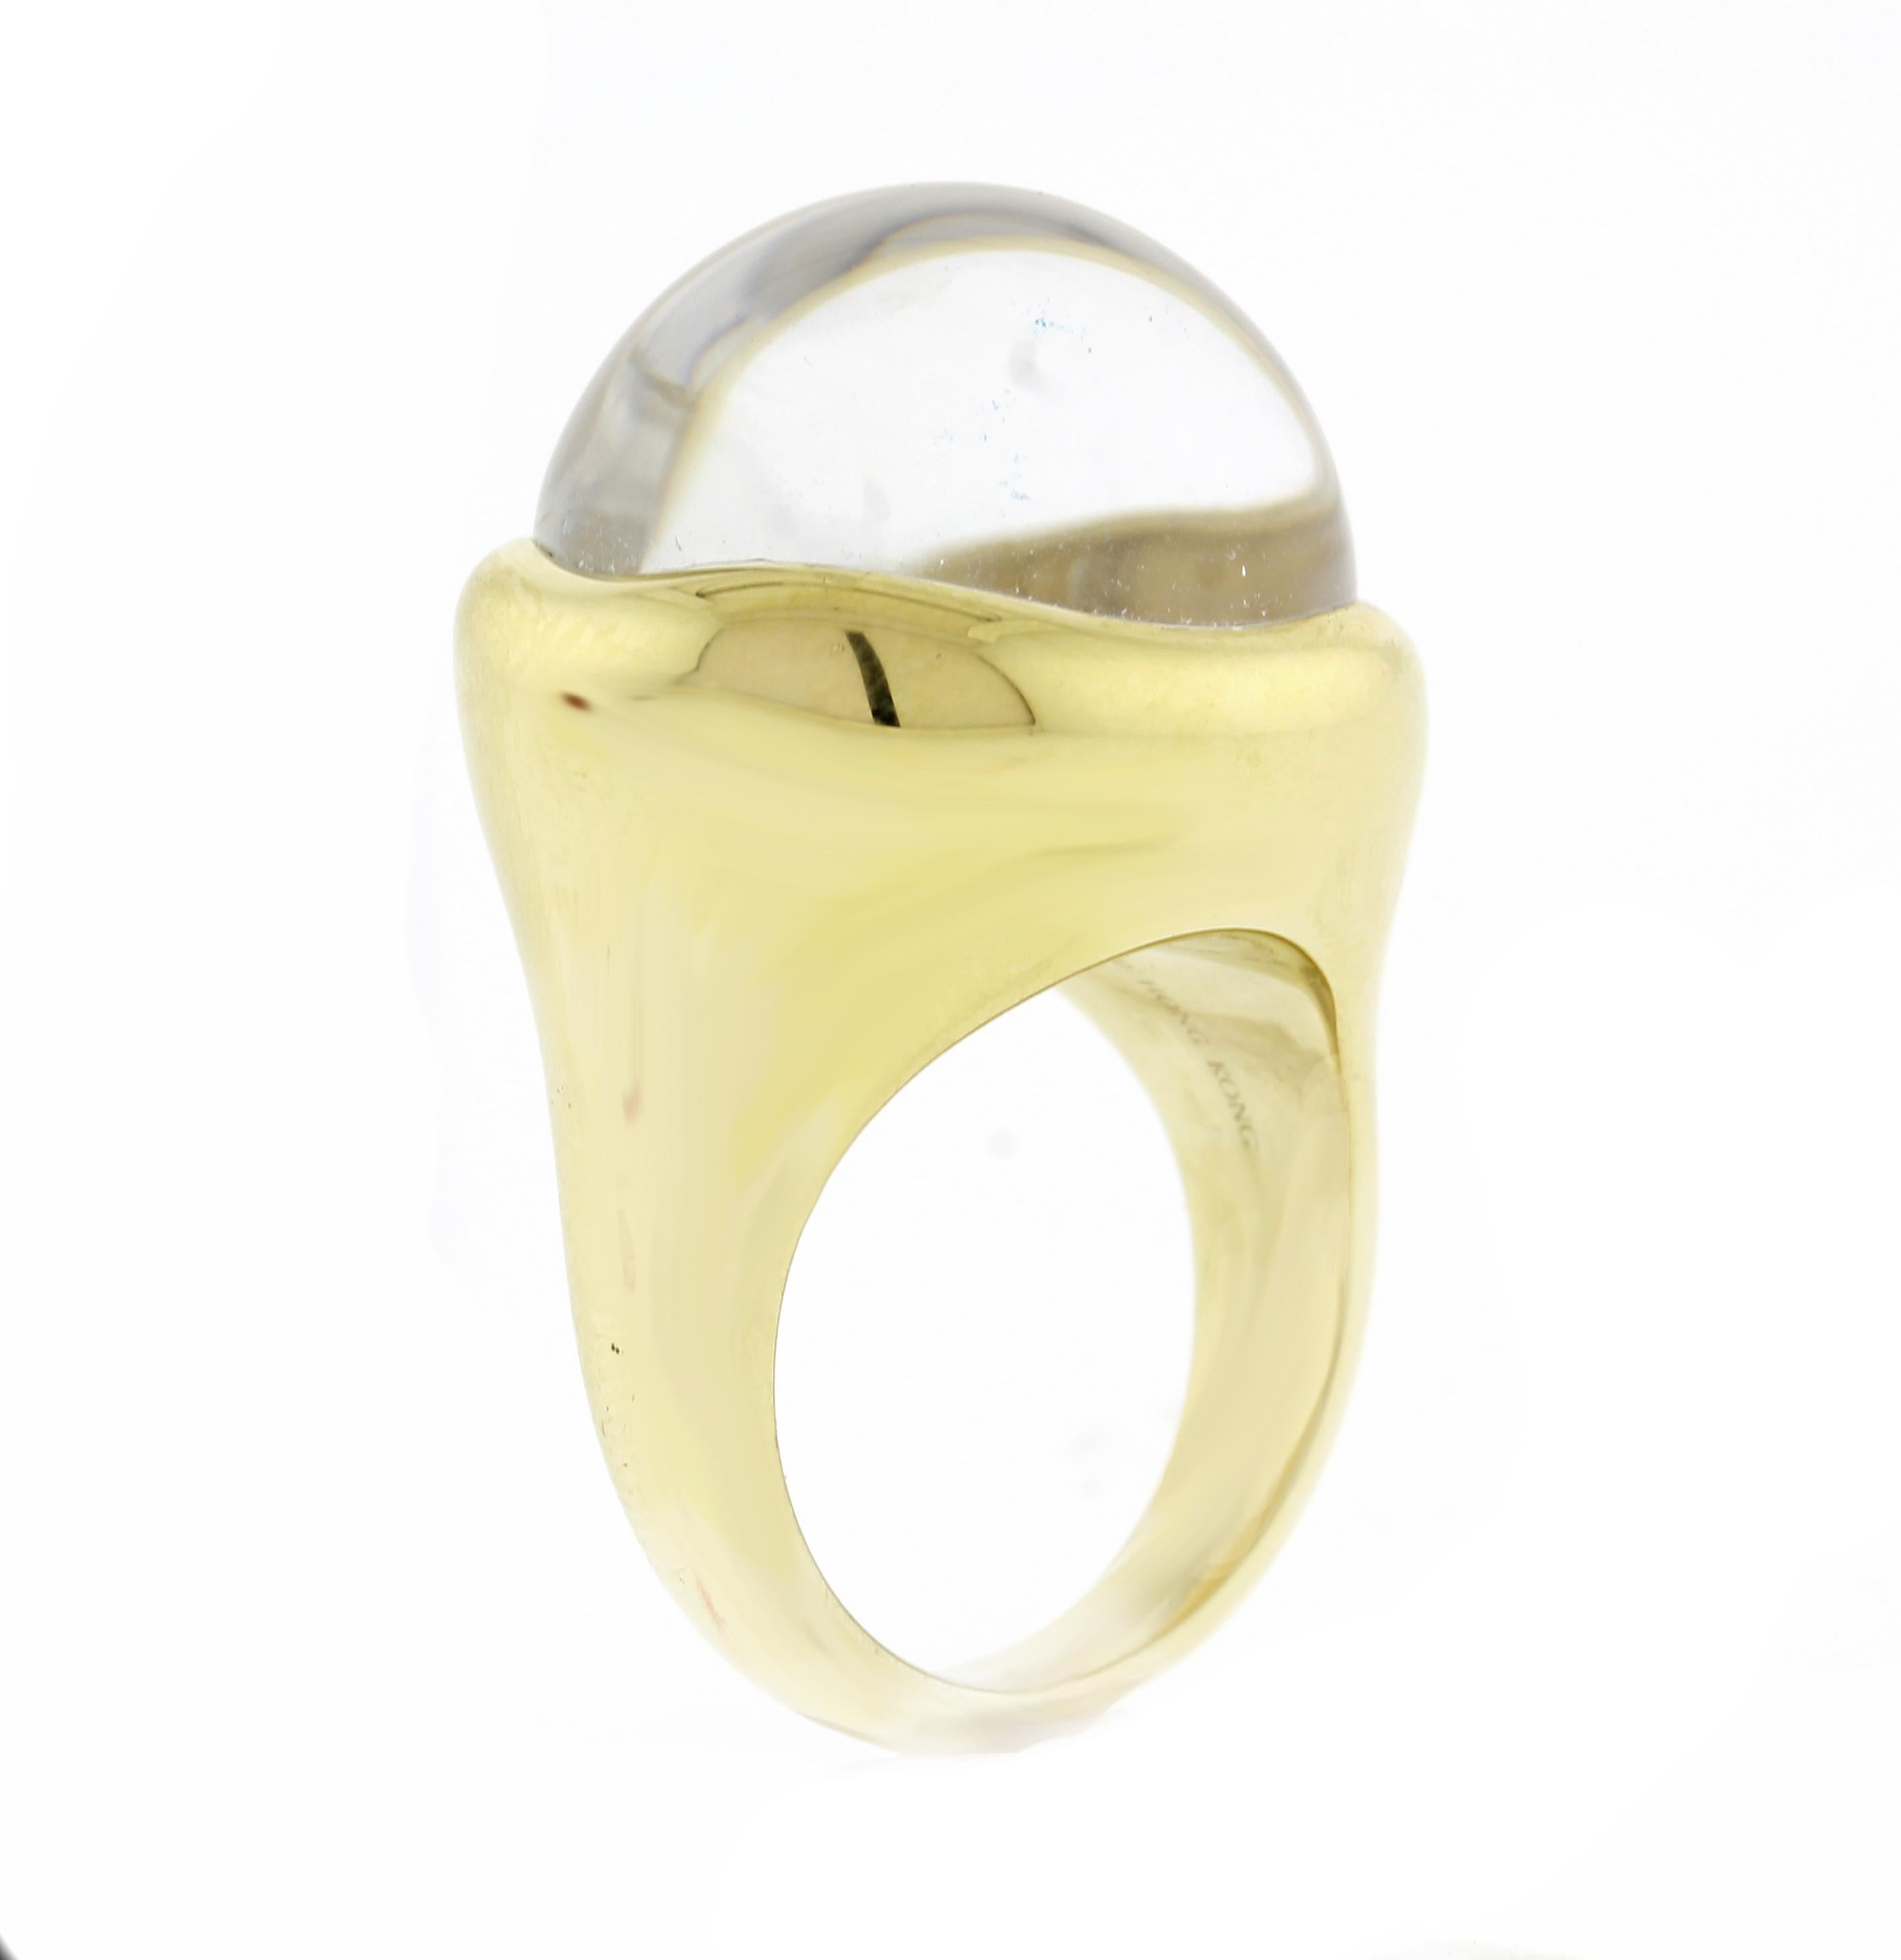 From  Tiffany & Co designer Elsa Peretti  this wonderful cabochon clear crystal dome ring.

♦ Designer:  Elsa Peretti  for Tiffany & Co
♦ Metal: 18 karat
♦ Crystal   18mm x 20mm.
♦ size 6½
♦ Circa 2015
♦ Packaging: Tiffany box 
♦ Condition: